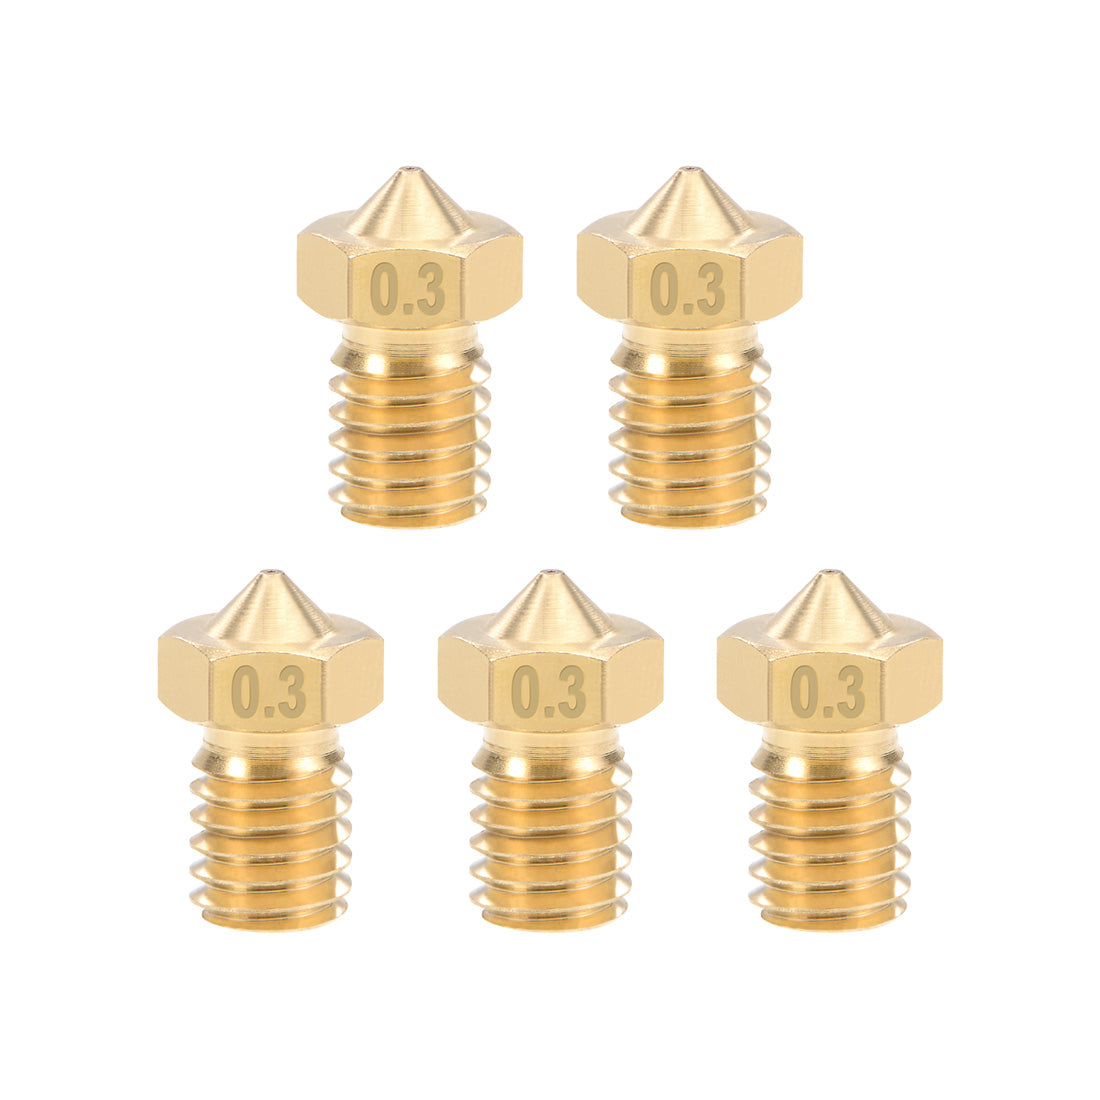 uxcell Uxcell 0.3mm 3D Printer Nozzle Head M6 for V5 V6 2mm Extruder Print, Brass 5pcs